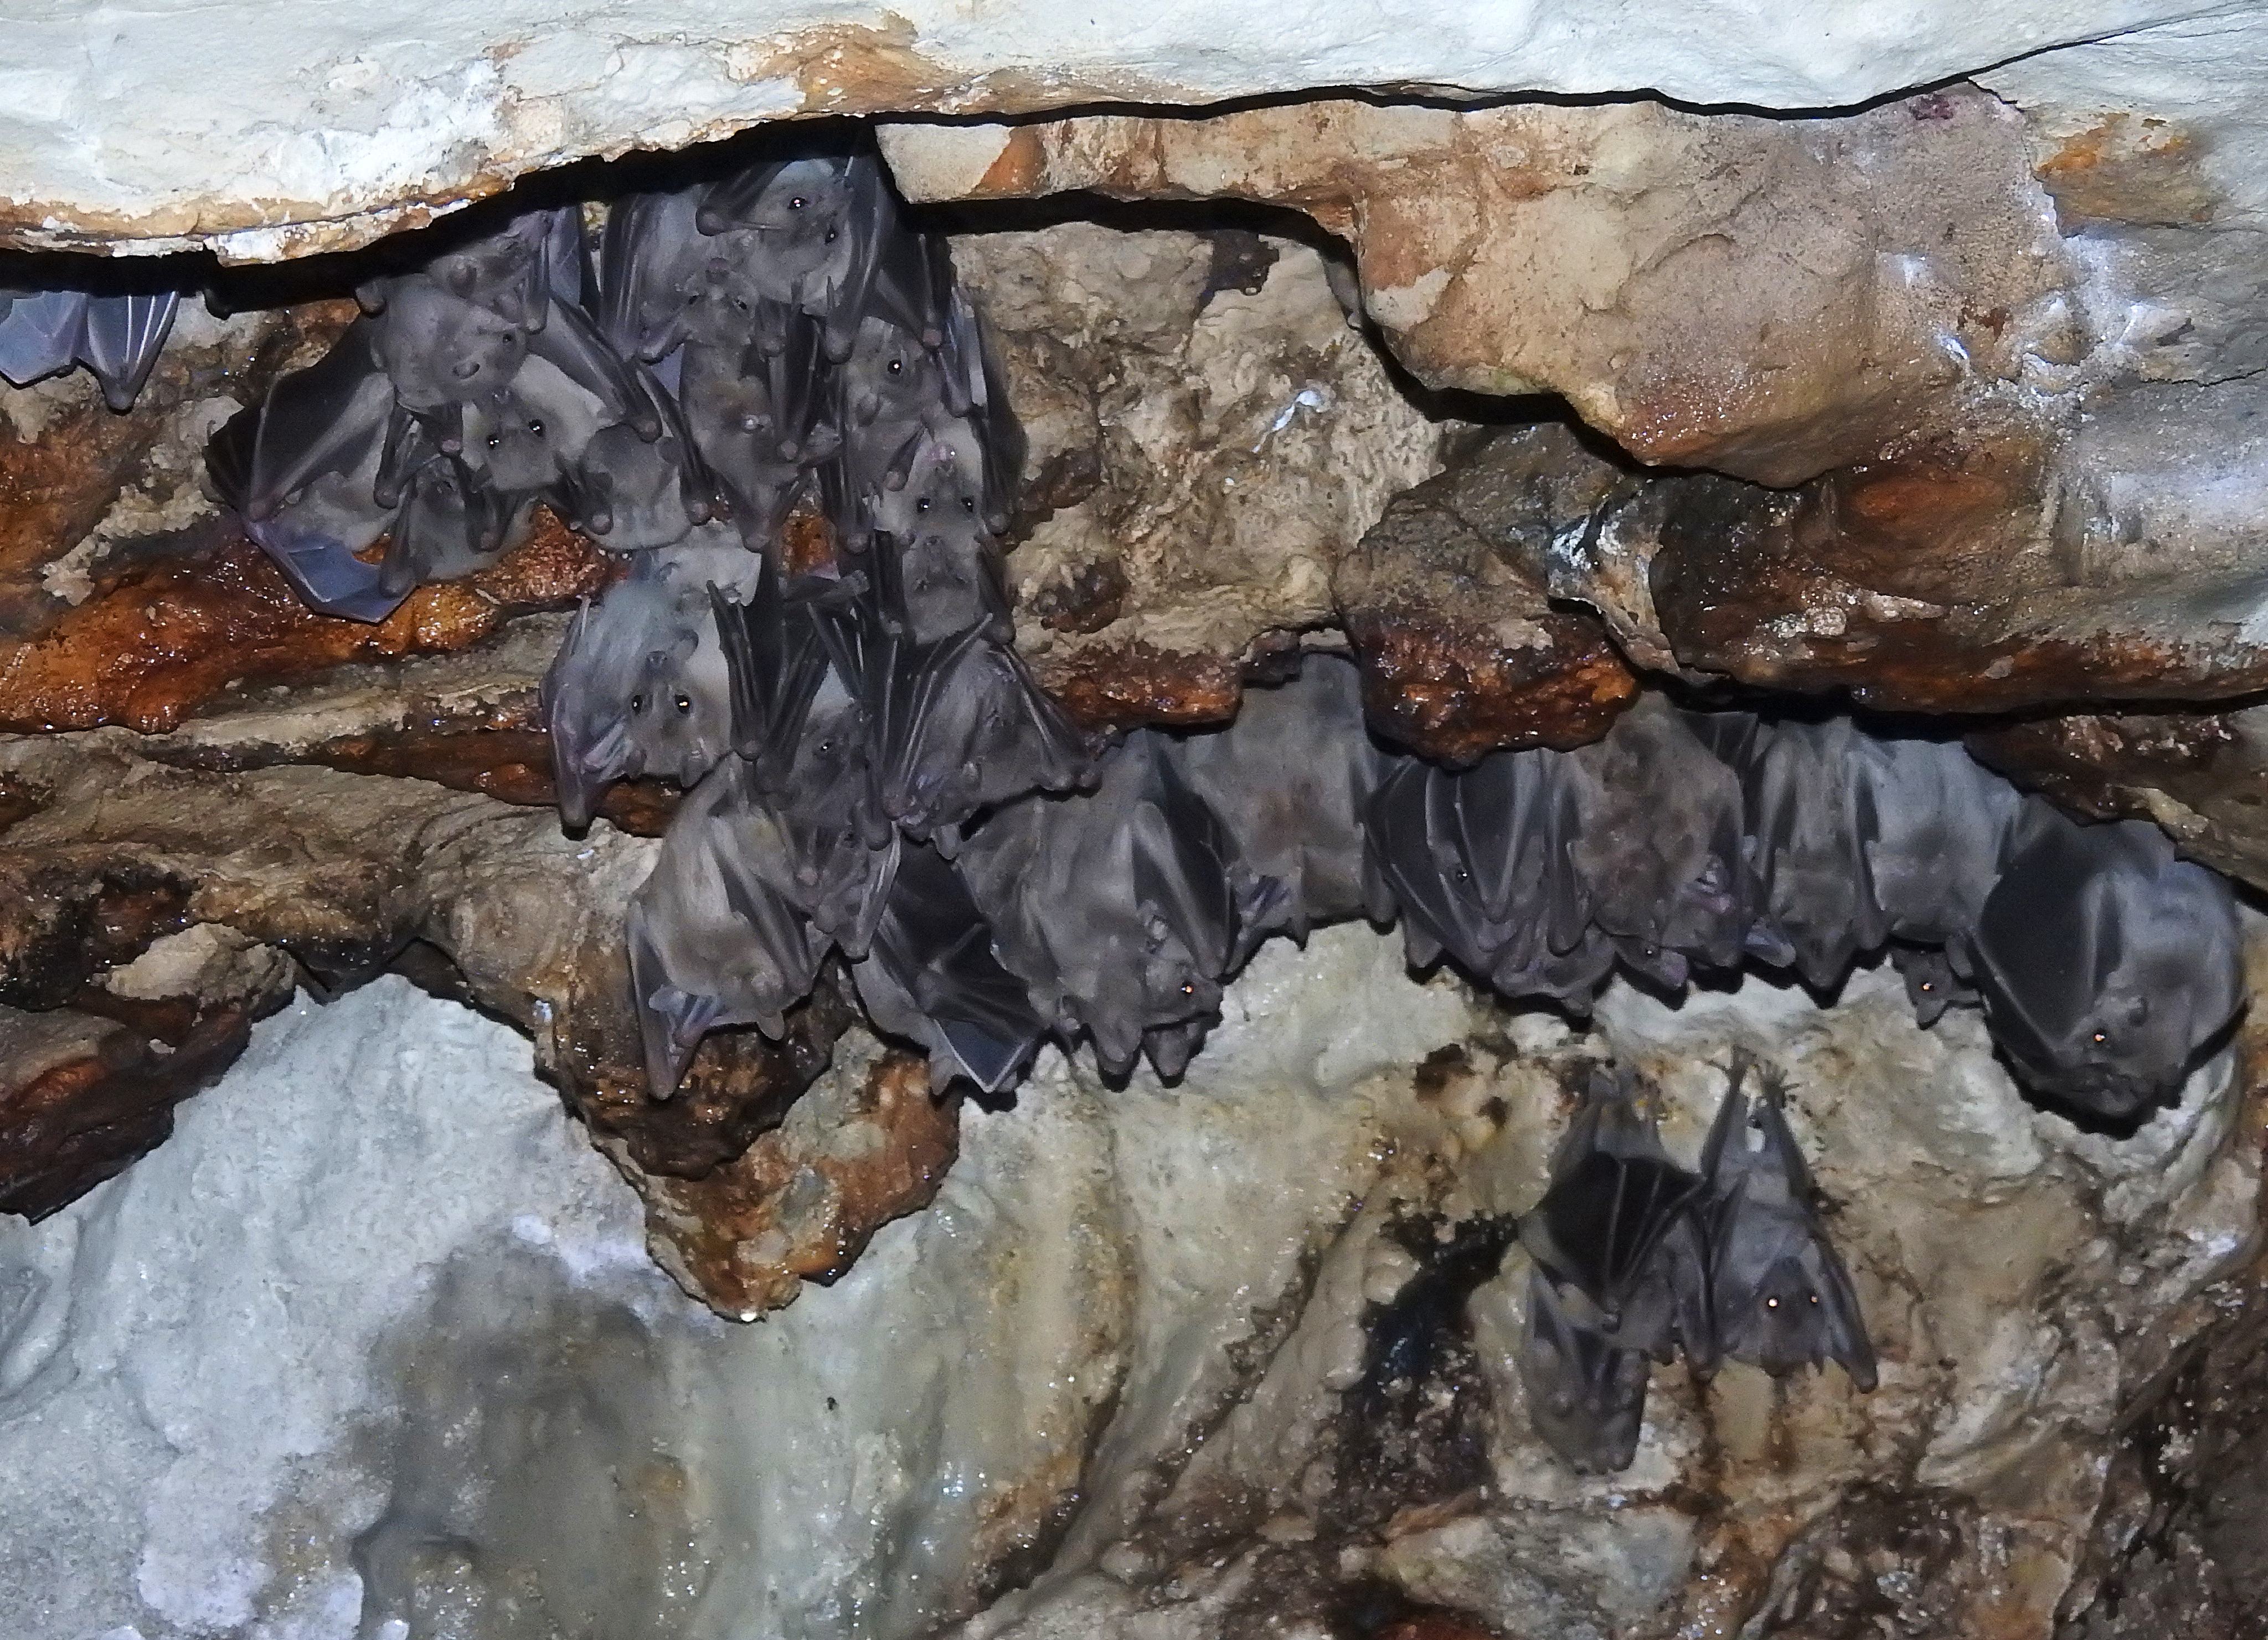 Some of the many fruit bats dangling from the cave ceiling